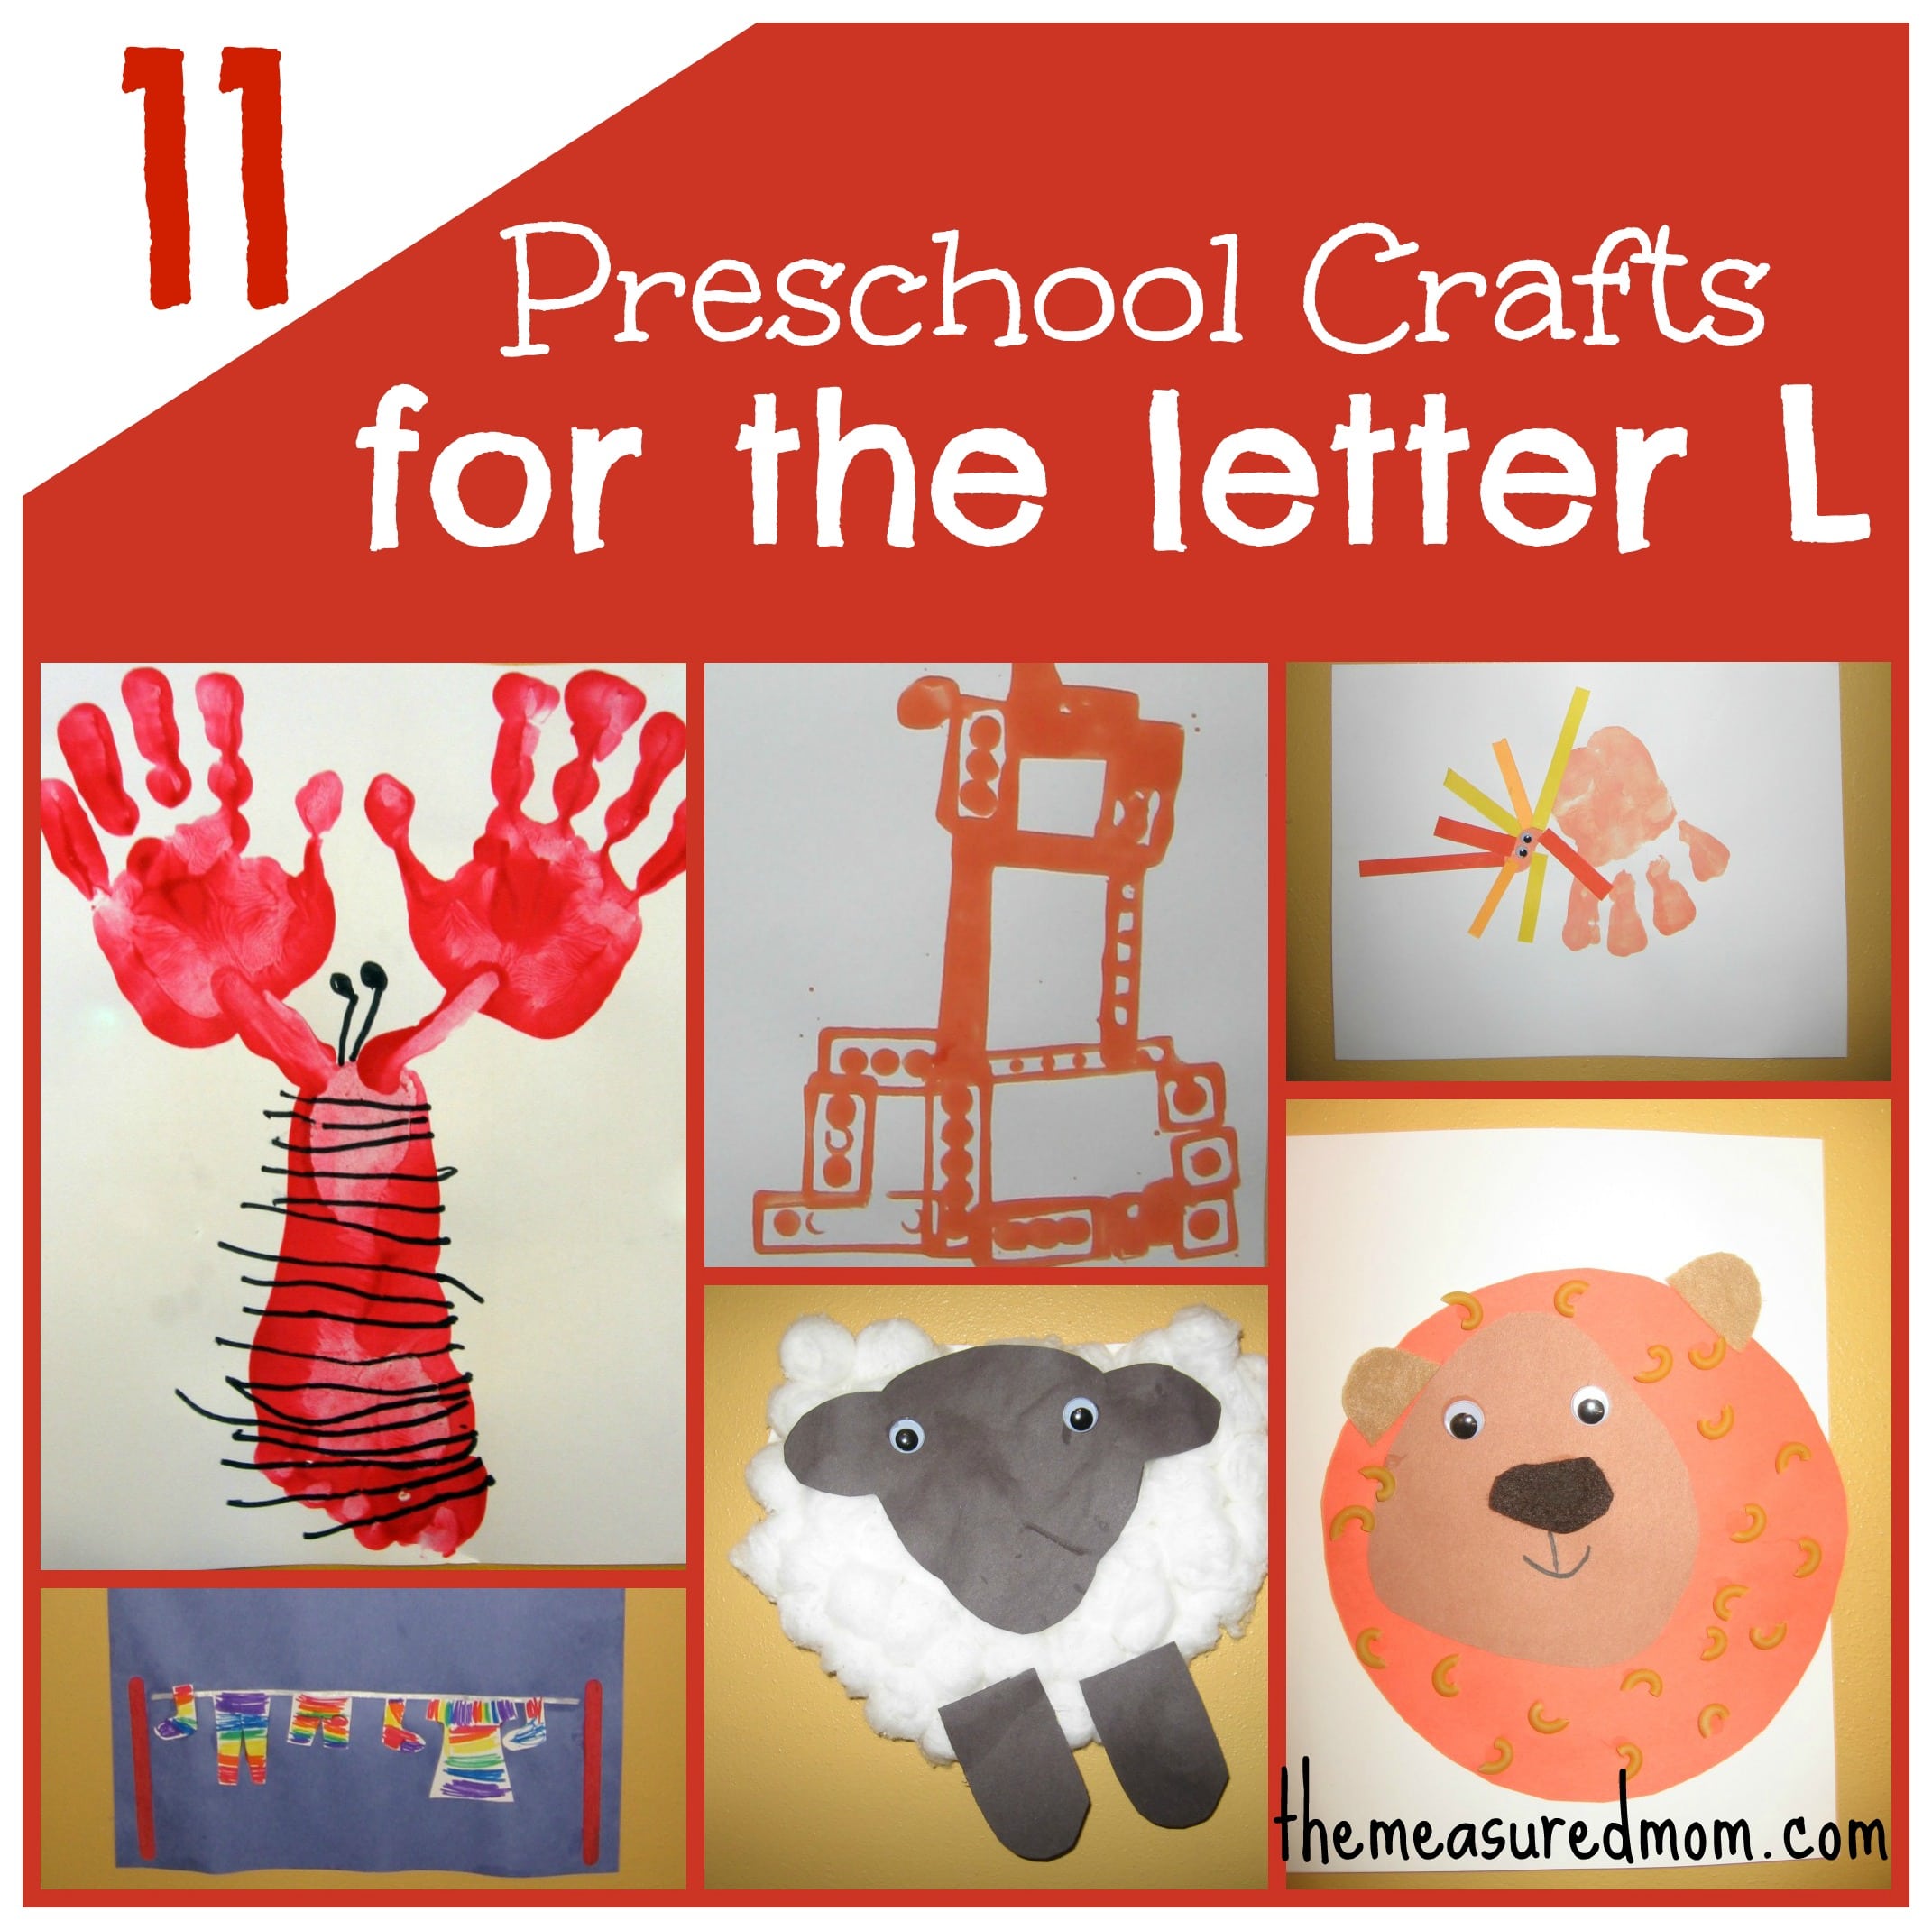 11-crafts-for-preschool-the-letter-l-the-measured-mom